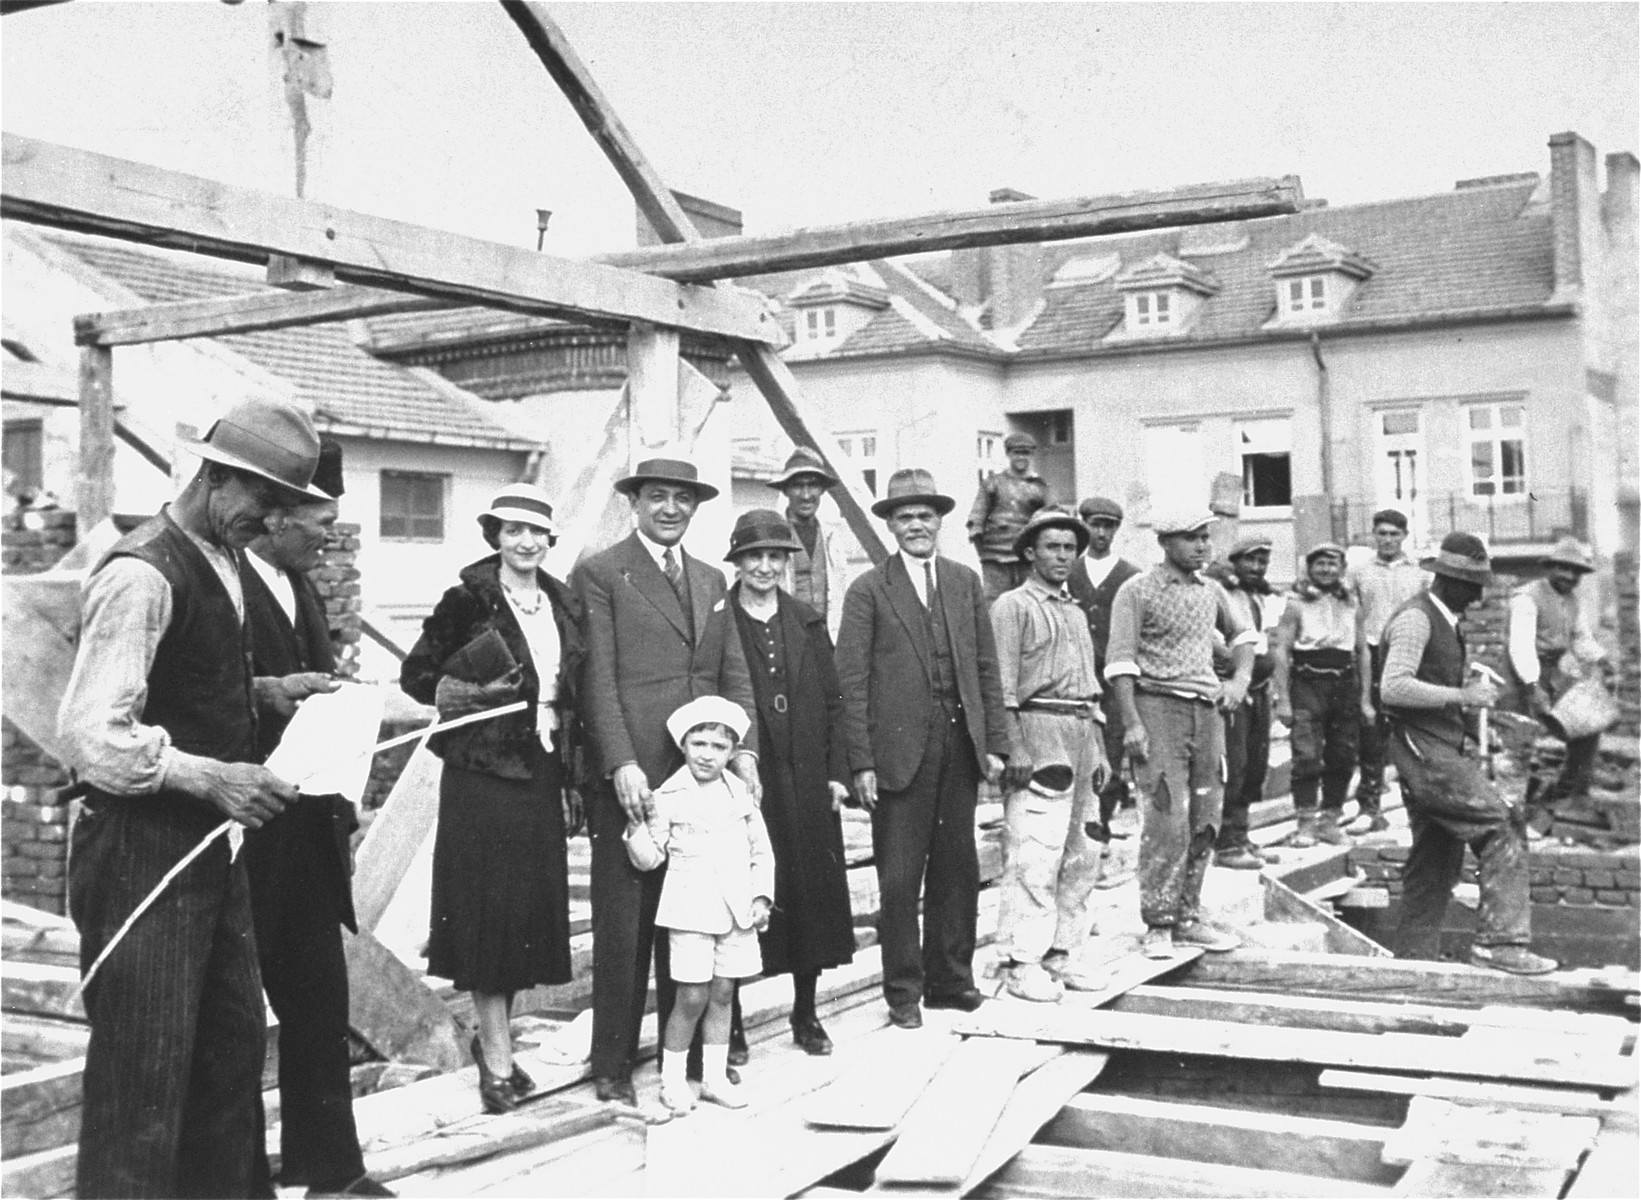 Members of the Yasharoff family pose with construction workers at the site of their new home, a three-story apartment building located at 24 Benkovska Street in Sofia.

Pictured from left to right are: two construction workers, Nelly and Joseph Yasharoff with two-year-old Norbert, Oro and Nissim Yasharoff.